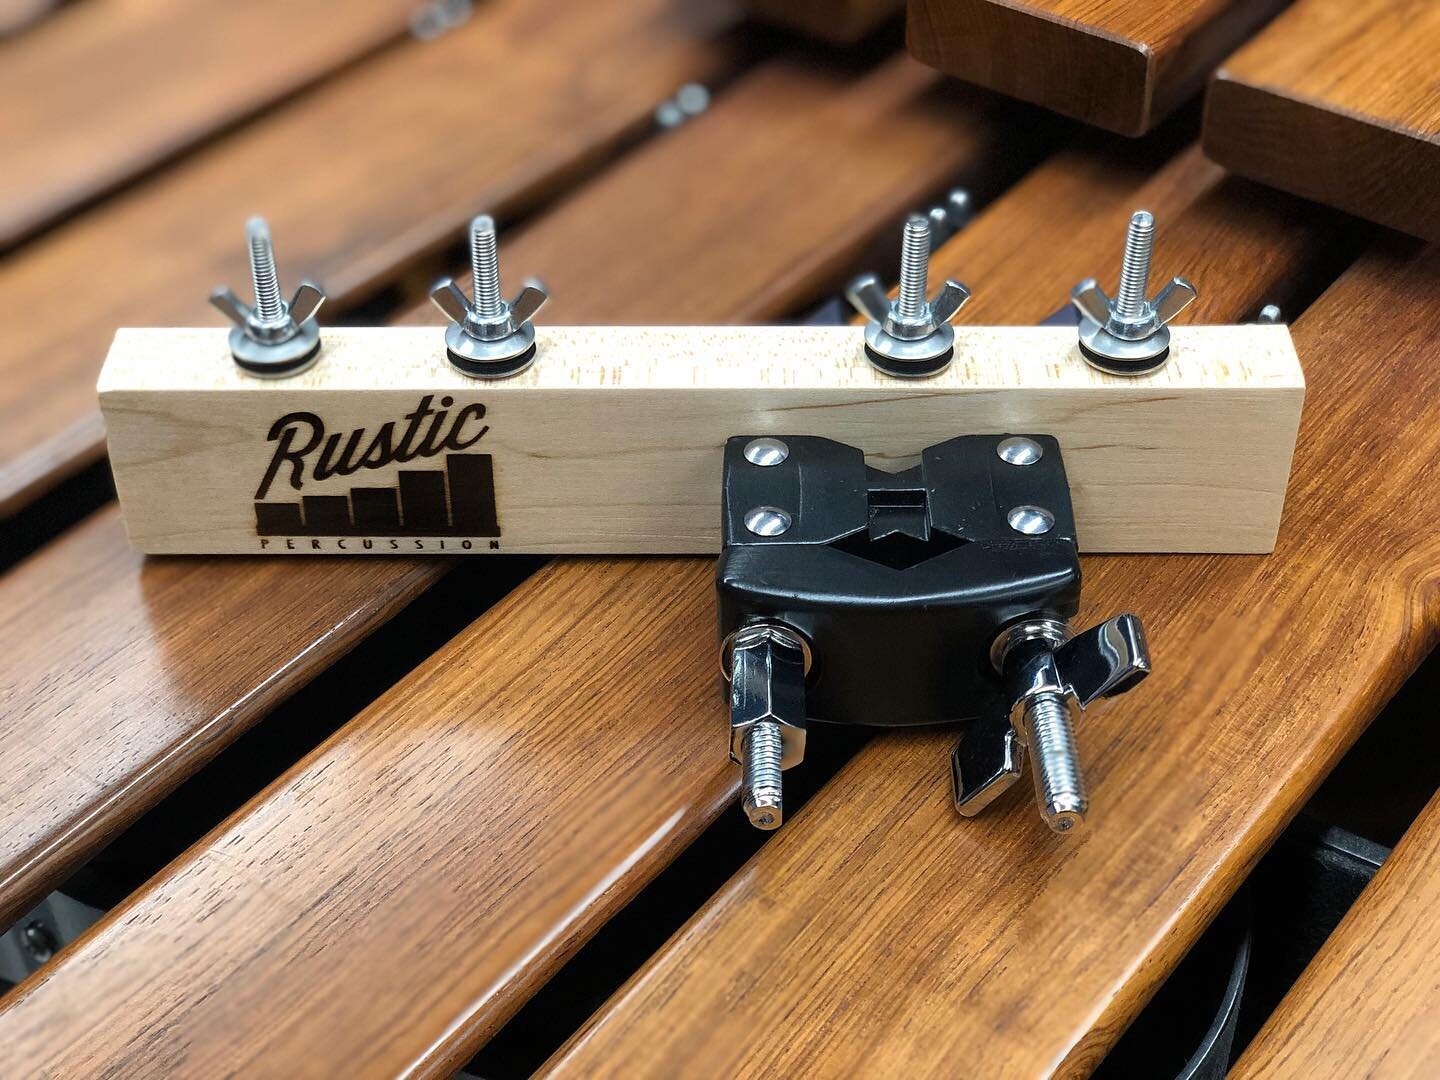 Here is a custom temple block mount we built a while back for Rustic Artist @krjstian. It&rsquo;s perfect for pit work or tight setups where you don&rsquo;t need a full set of blocks. 

#RusticPercussion #PadaukTempleBlocks #CustomMount #Custom #Perc